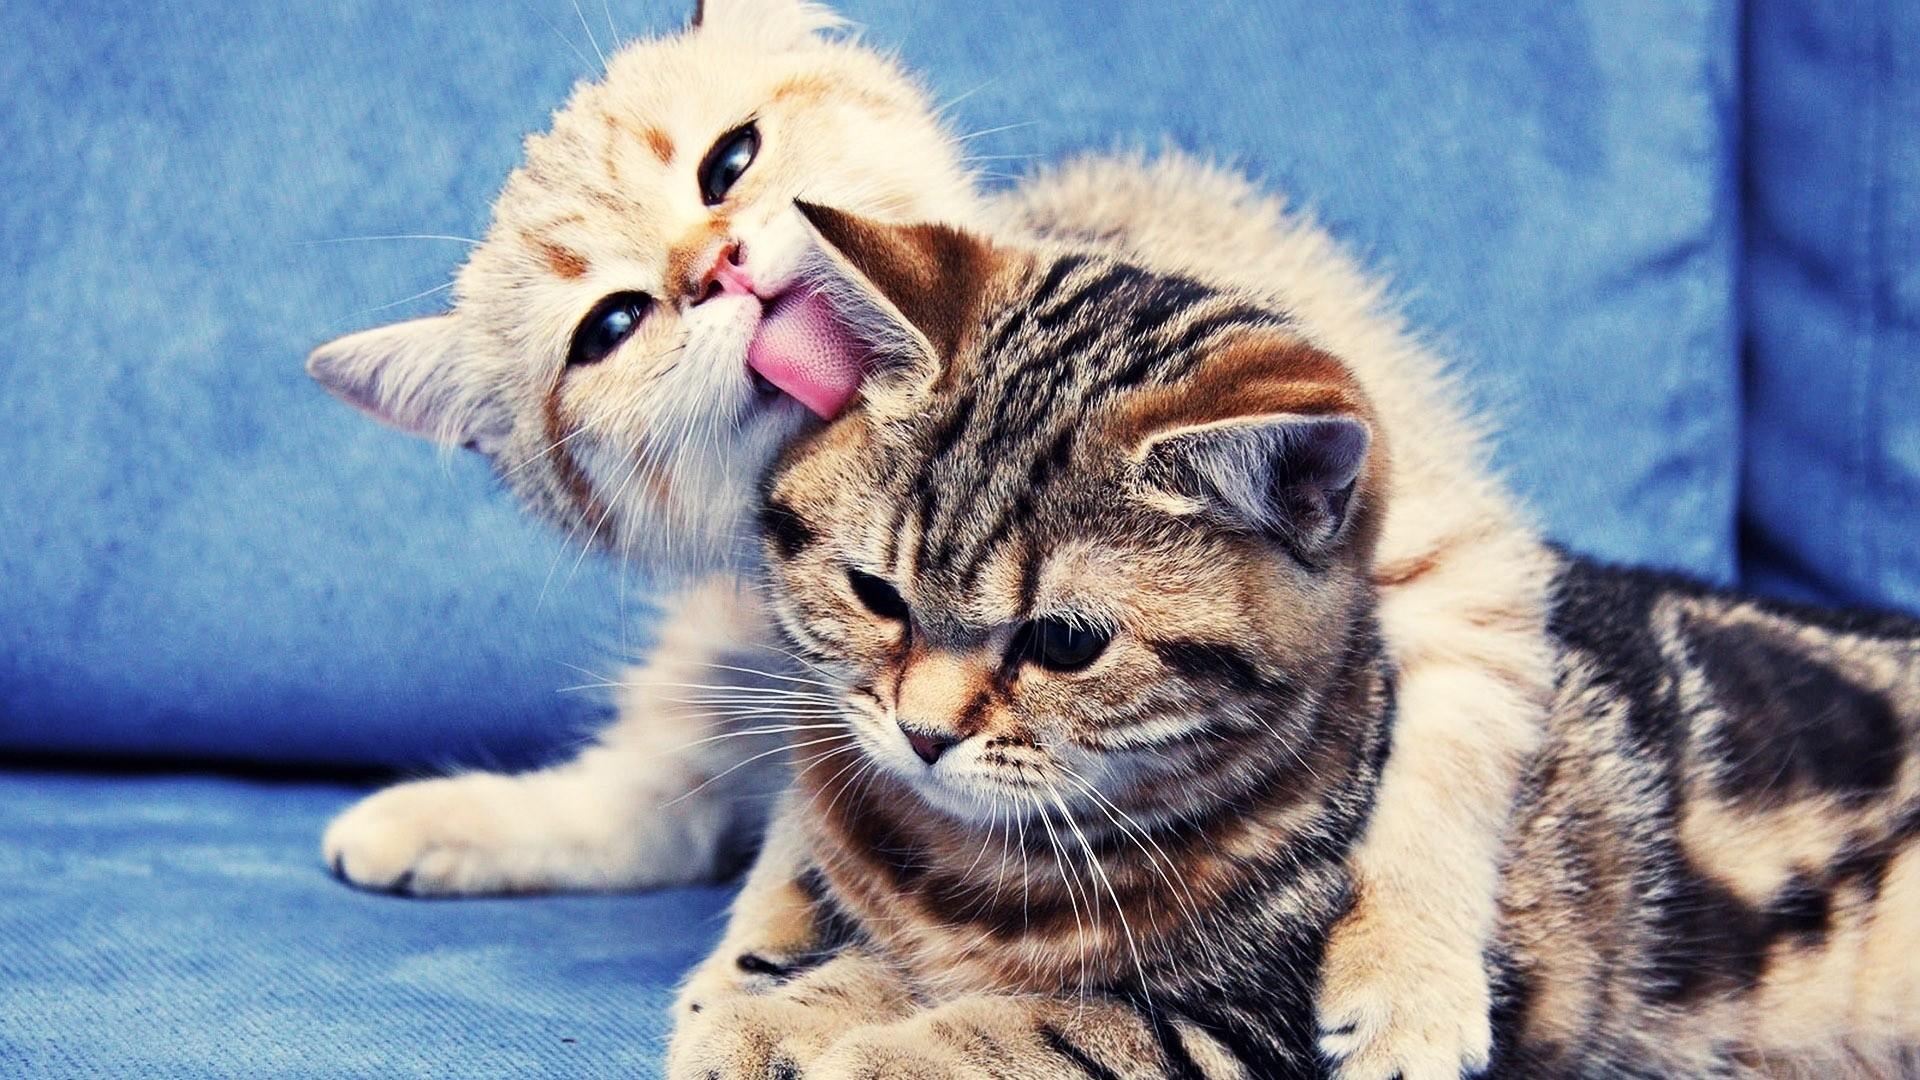 Two Cats Wallpapers - Top Free Two Cats Backgrounds - WallpaperAccess